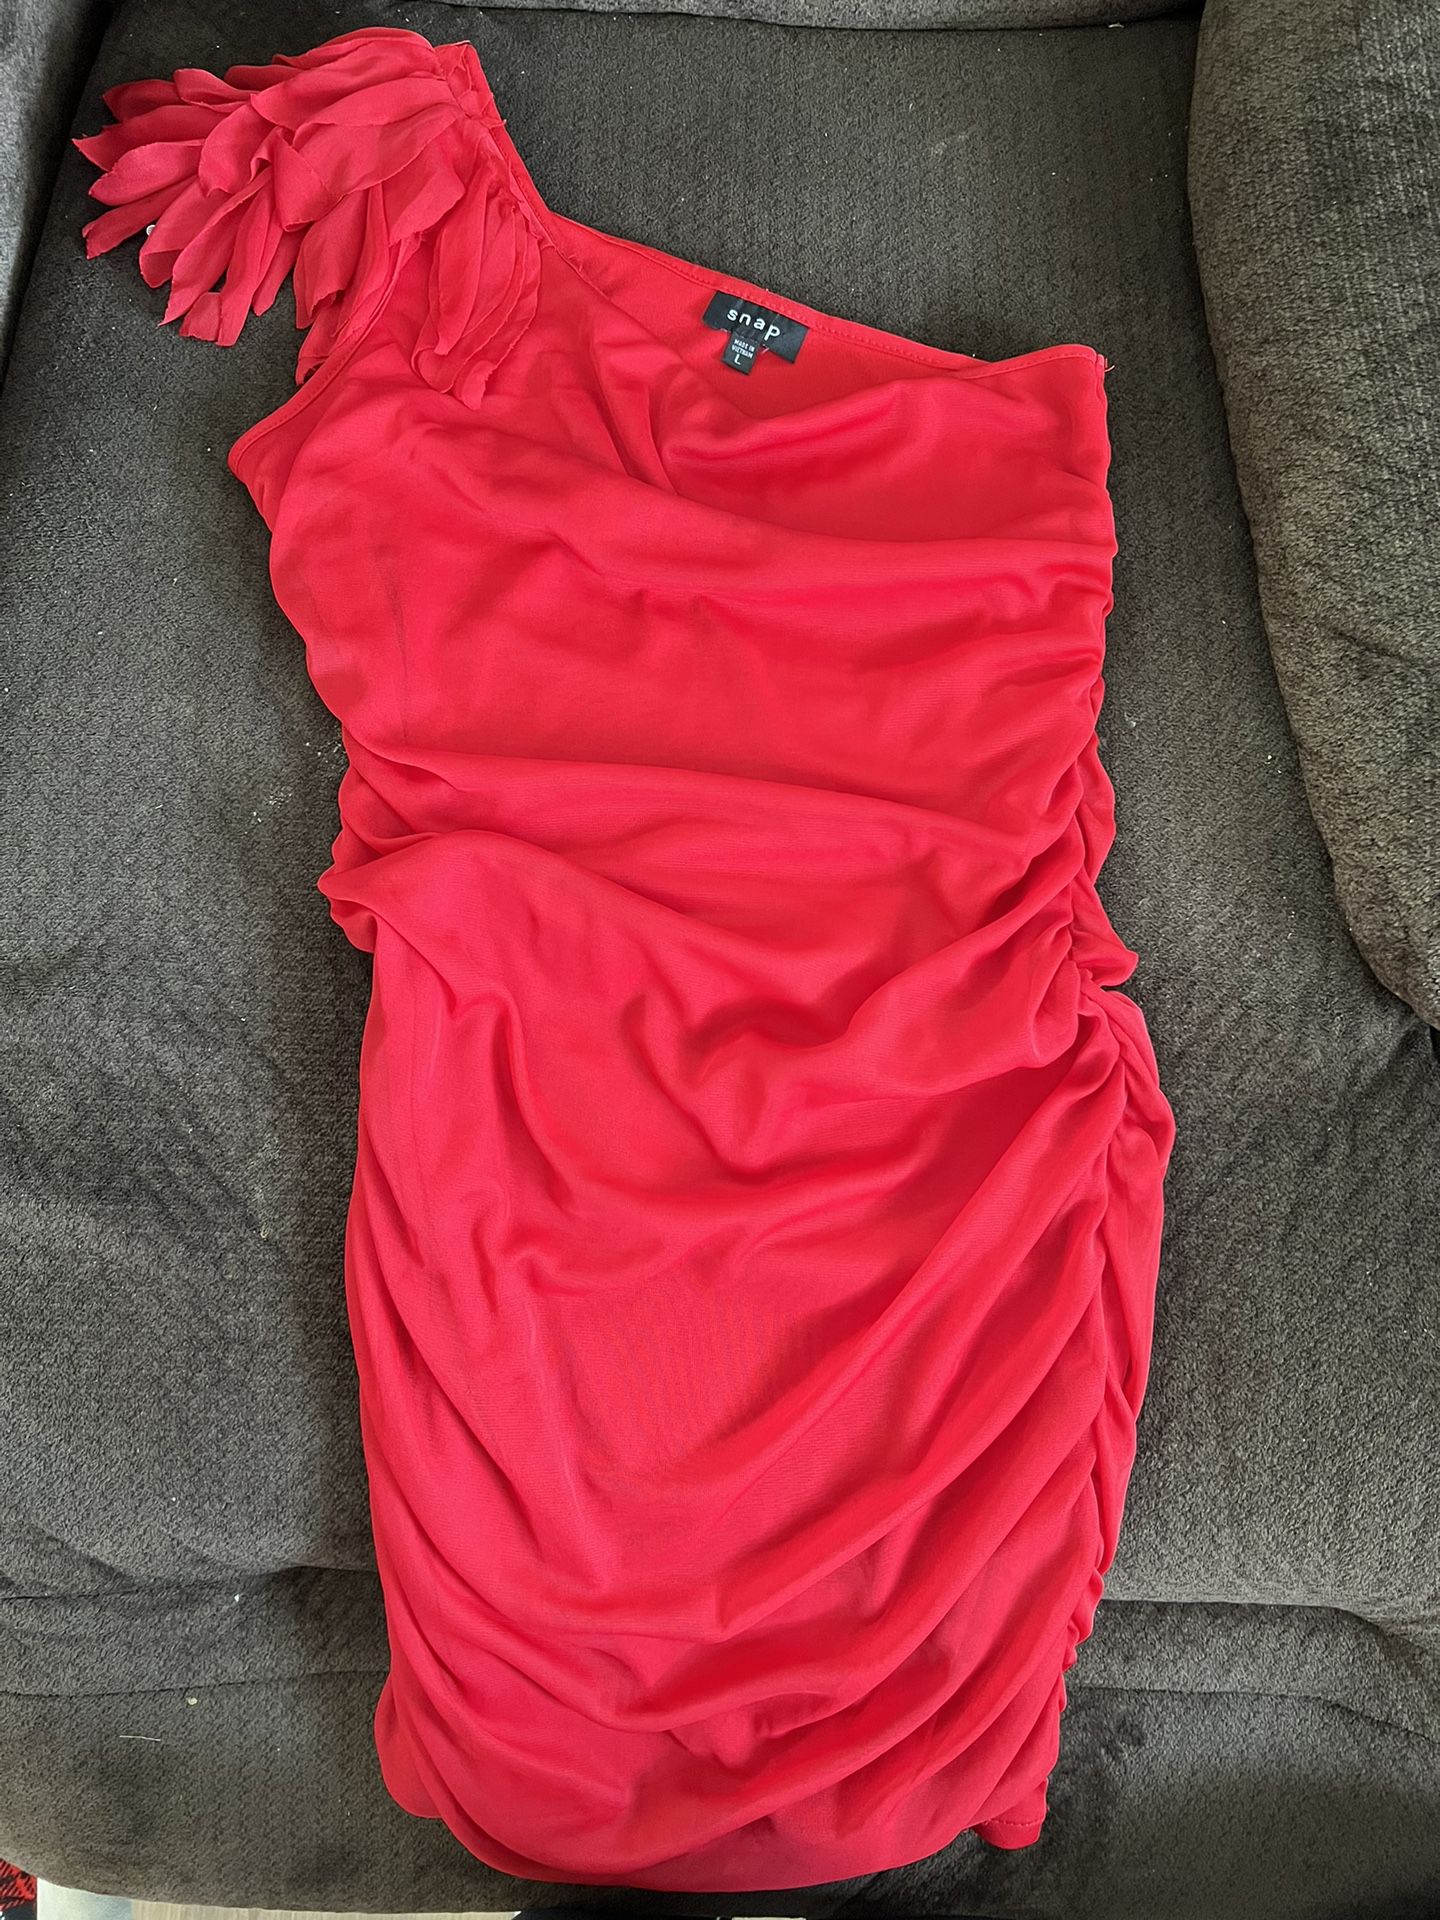 Mini Dress Red And Hot Pink 